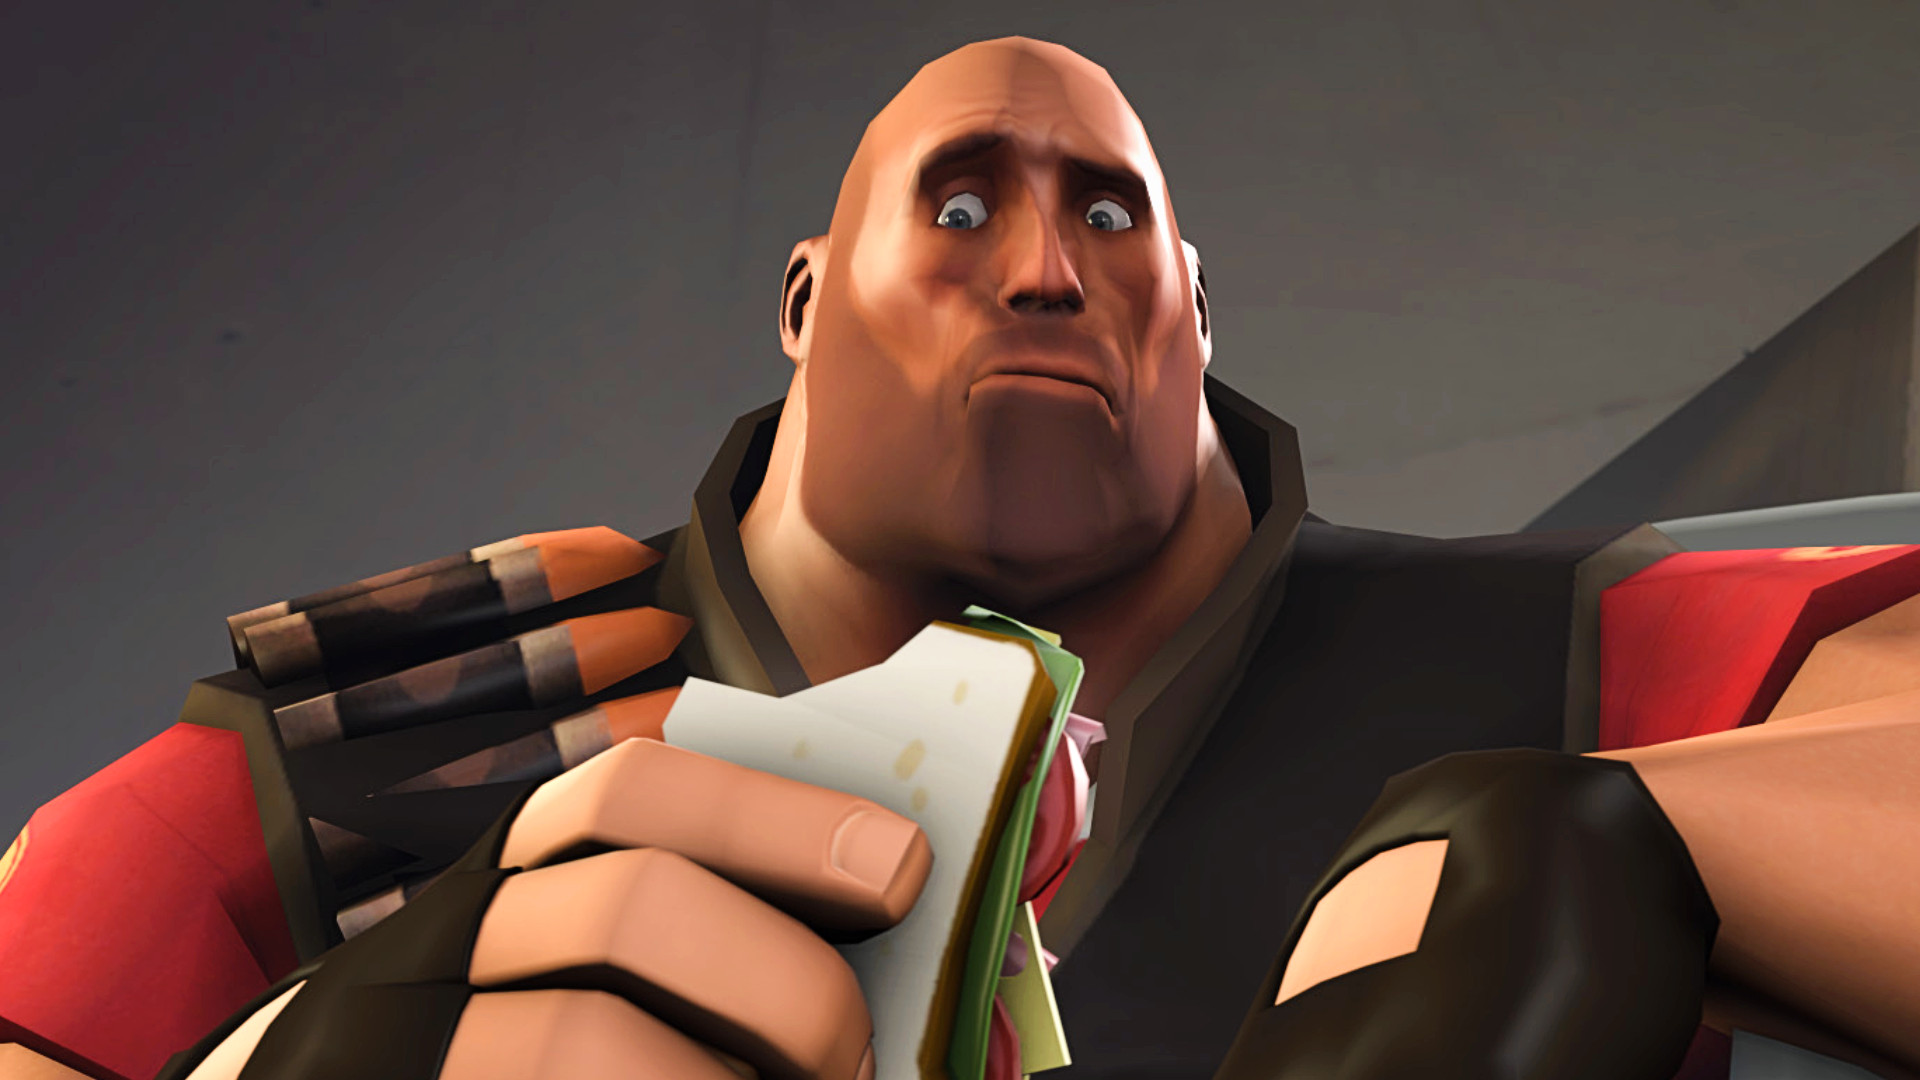 Team Fortress 2 update lets you boot bots faster, unless they kick you